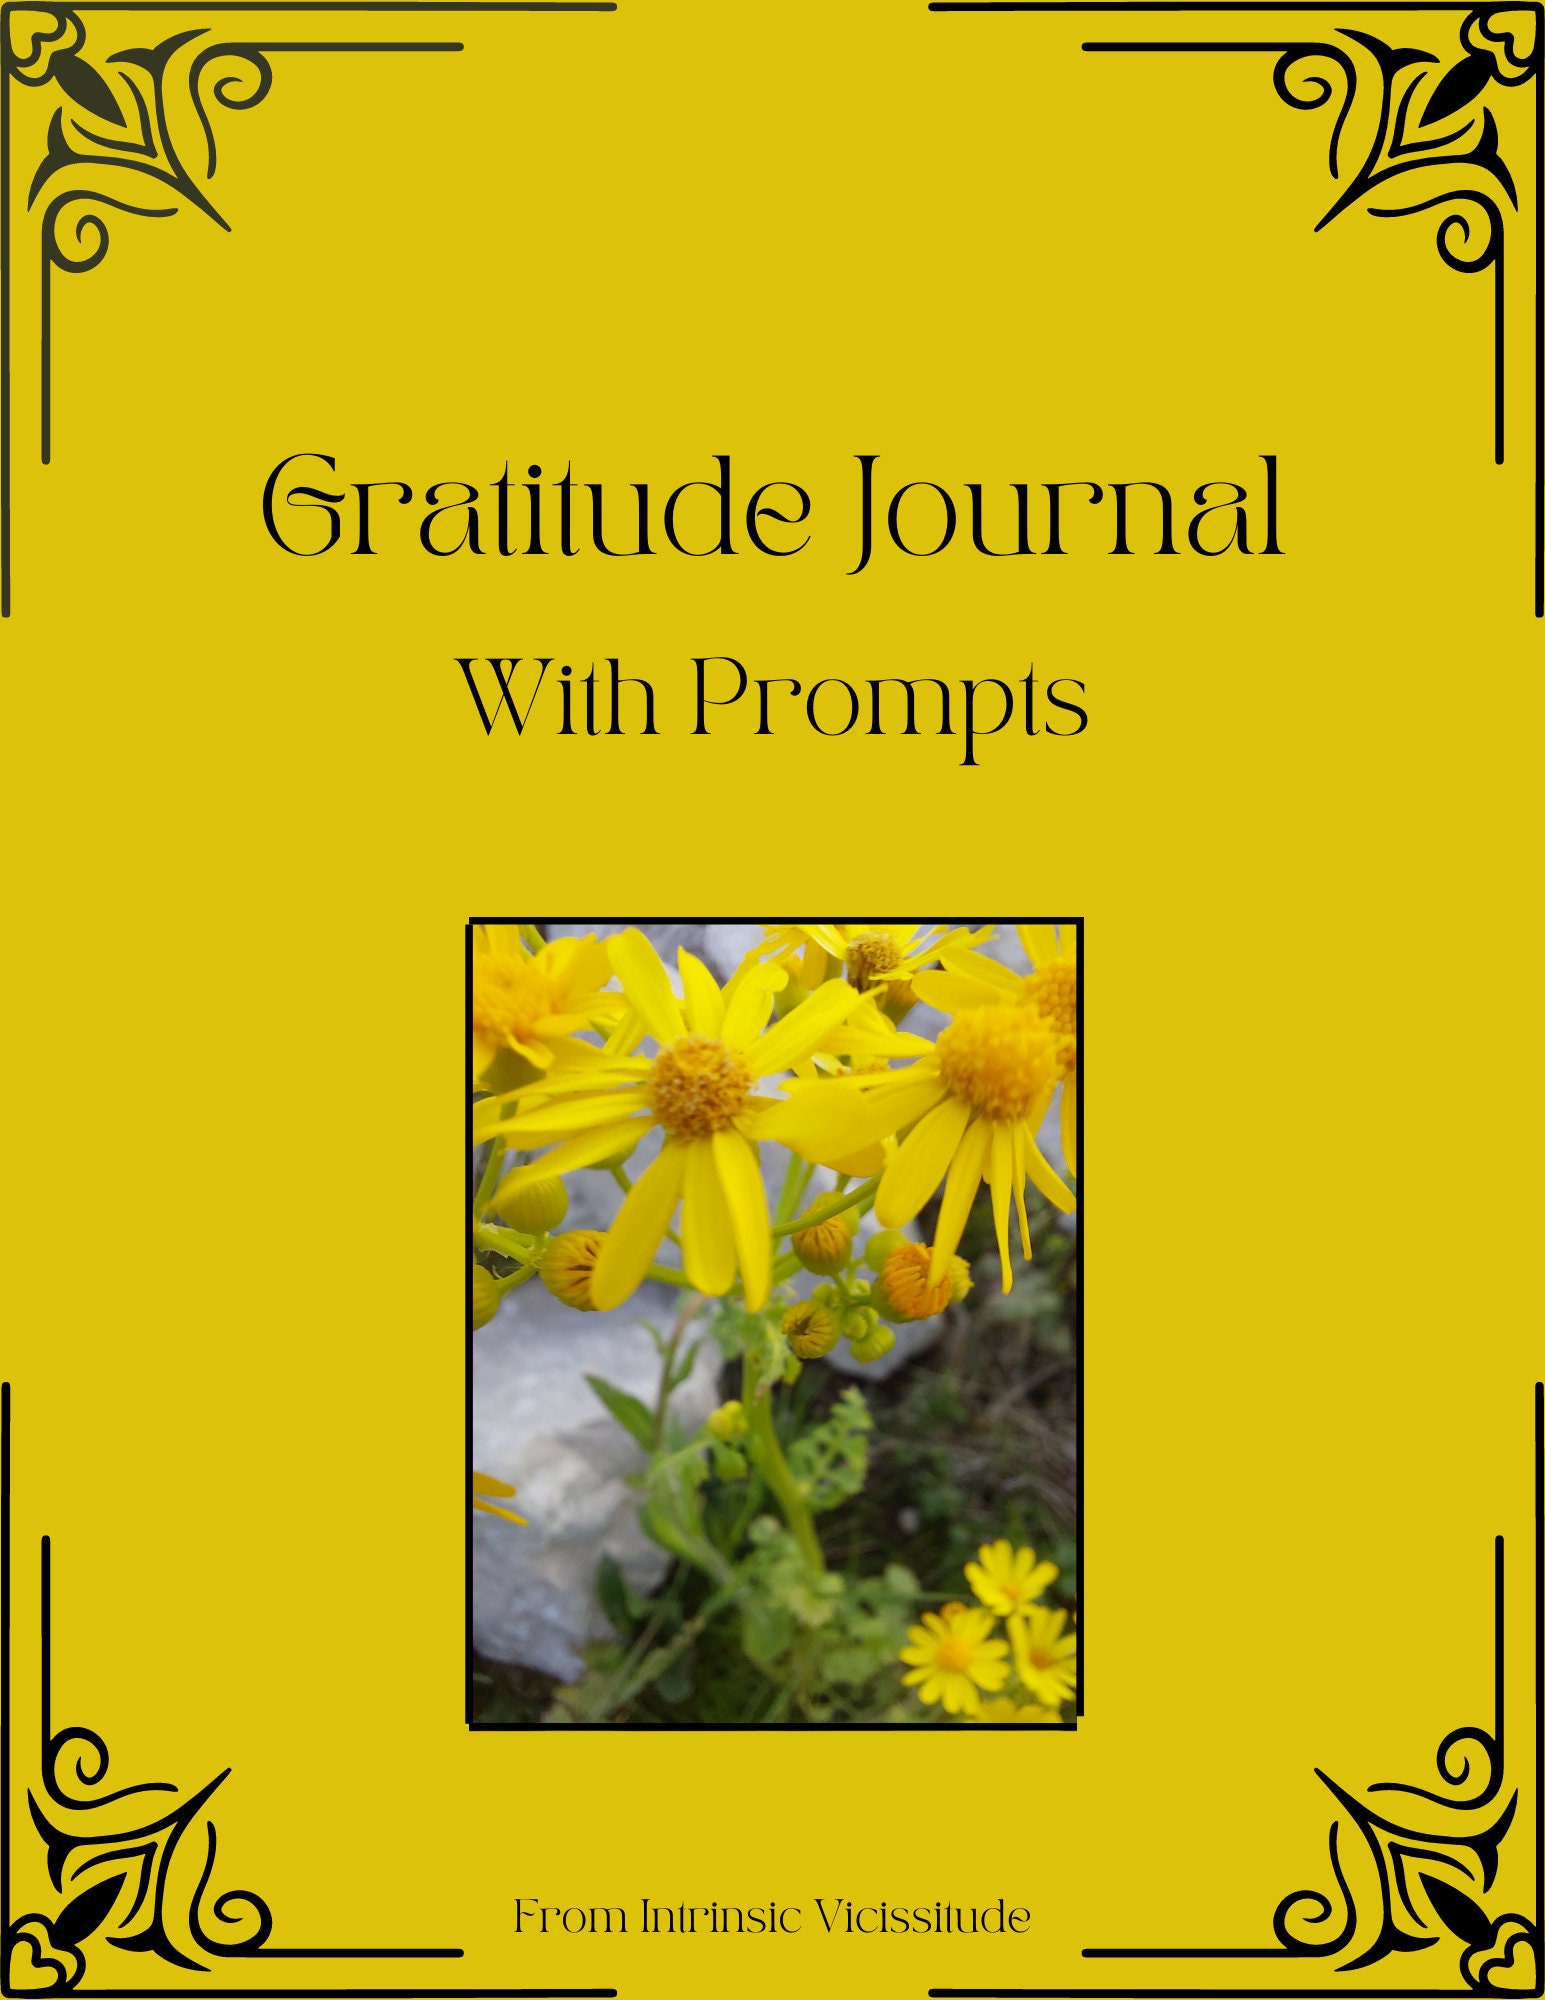 Printable Gratitude Journal With Prompts From Intrinsic - Etsy